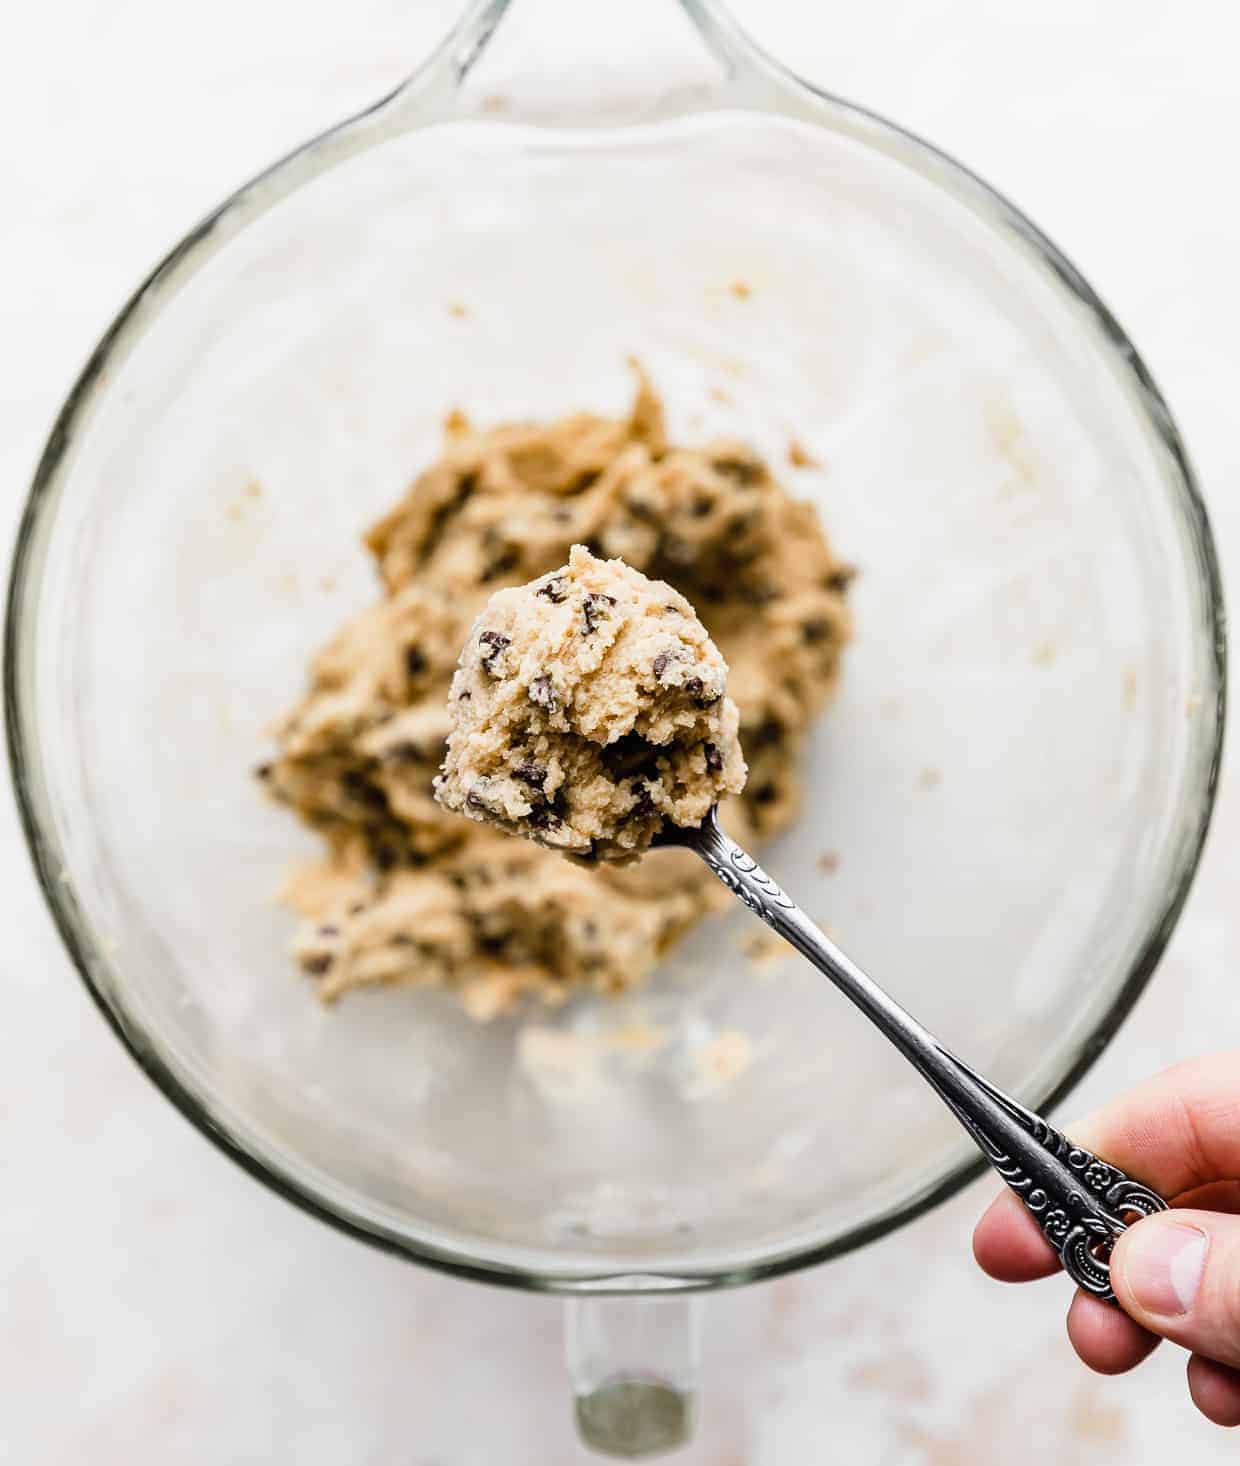 A spoon holding up a large scoop of edible homemade Ben and Jerry's Cookie Dough.